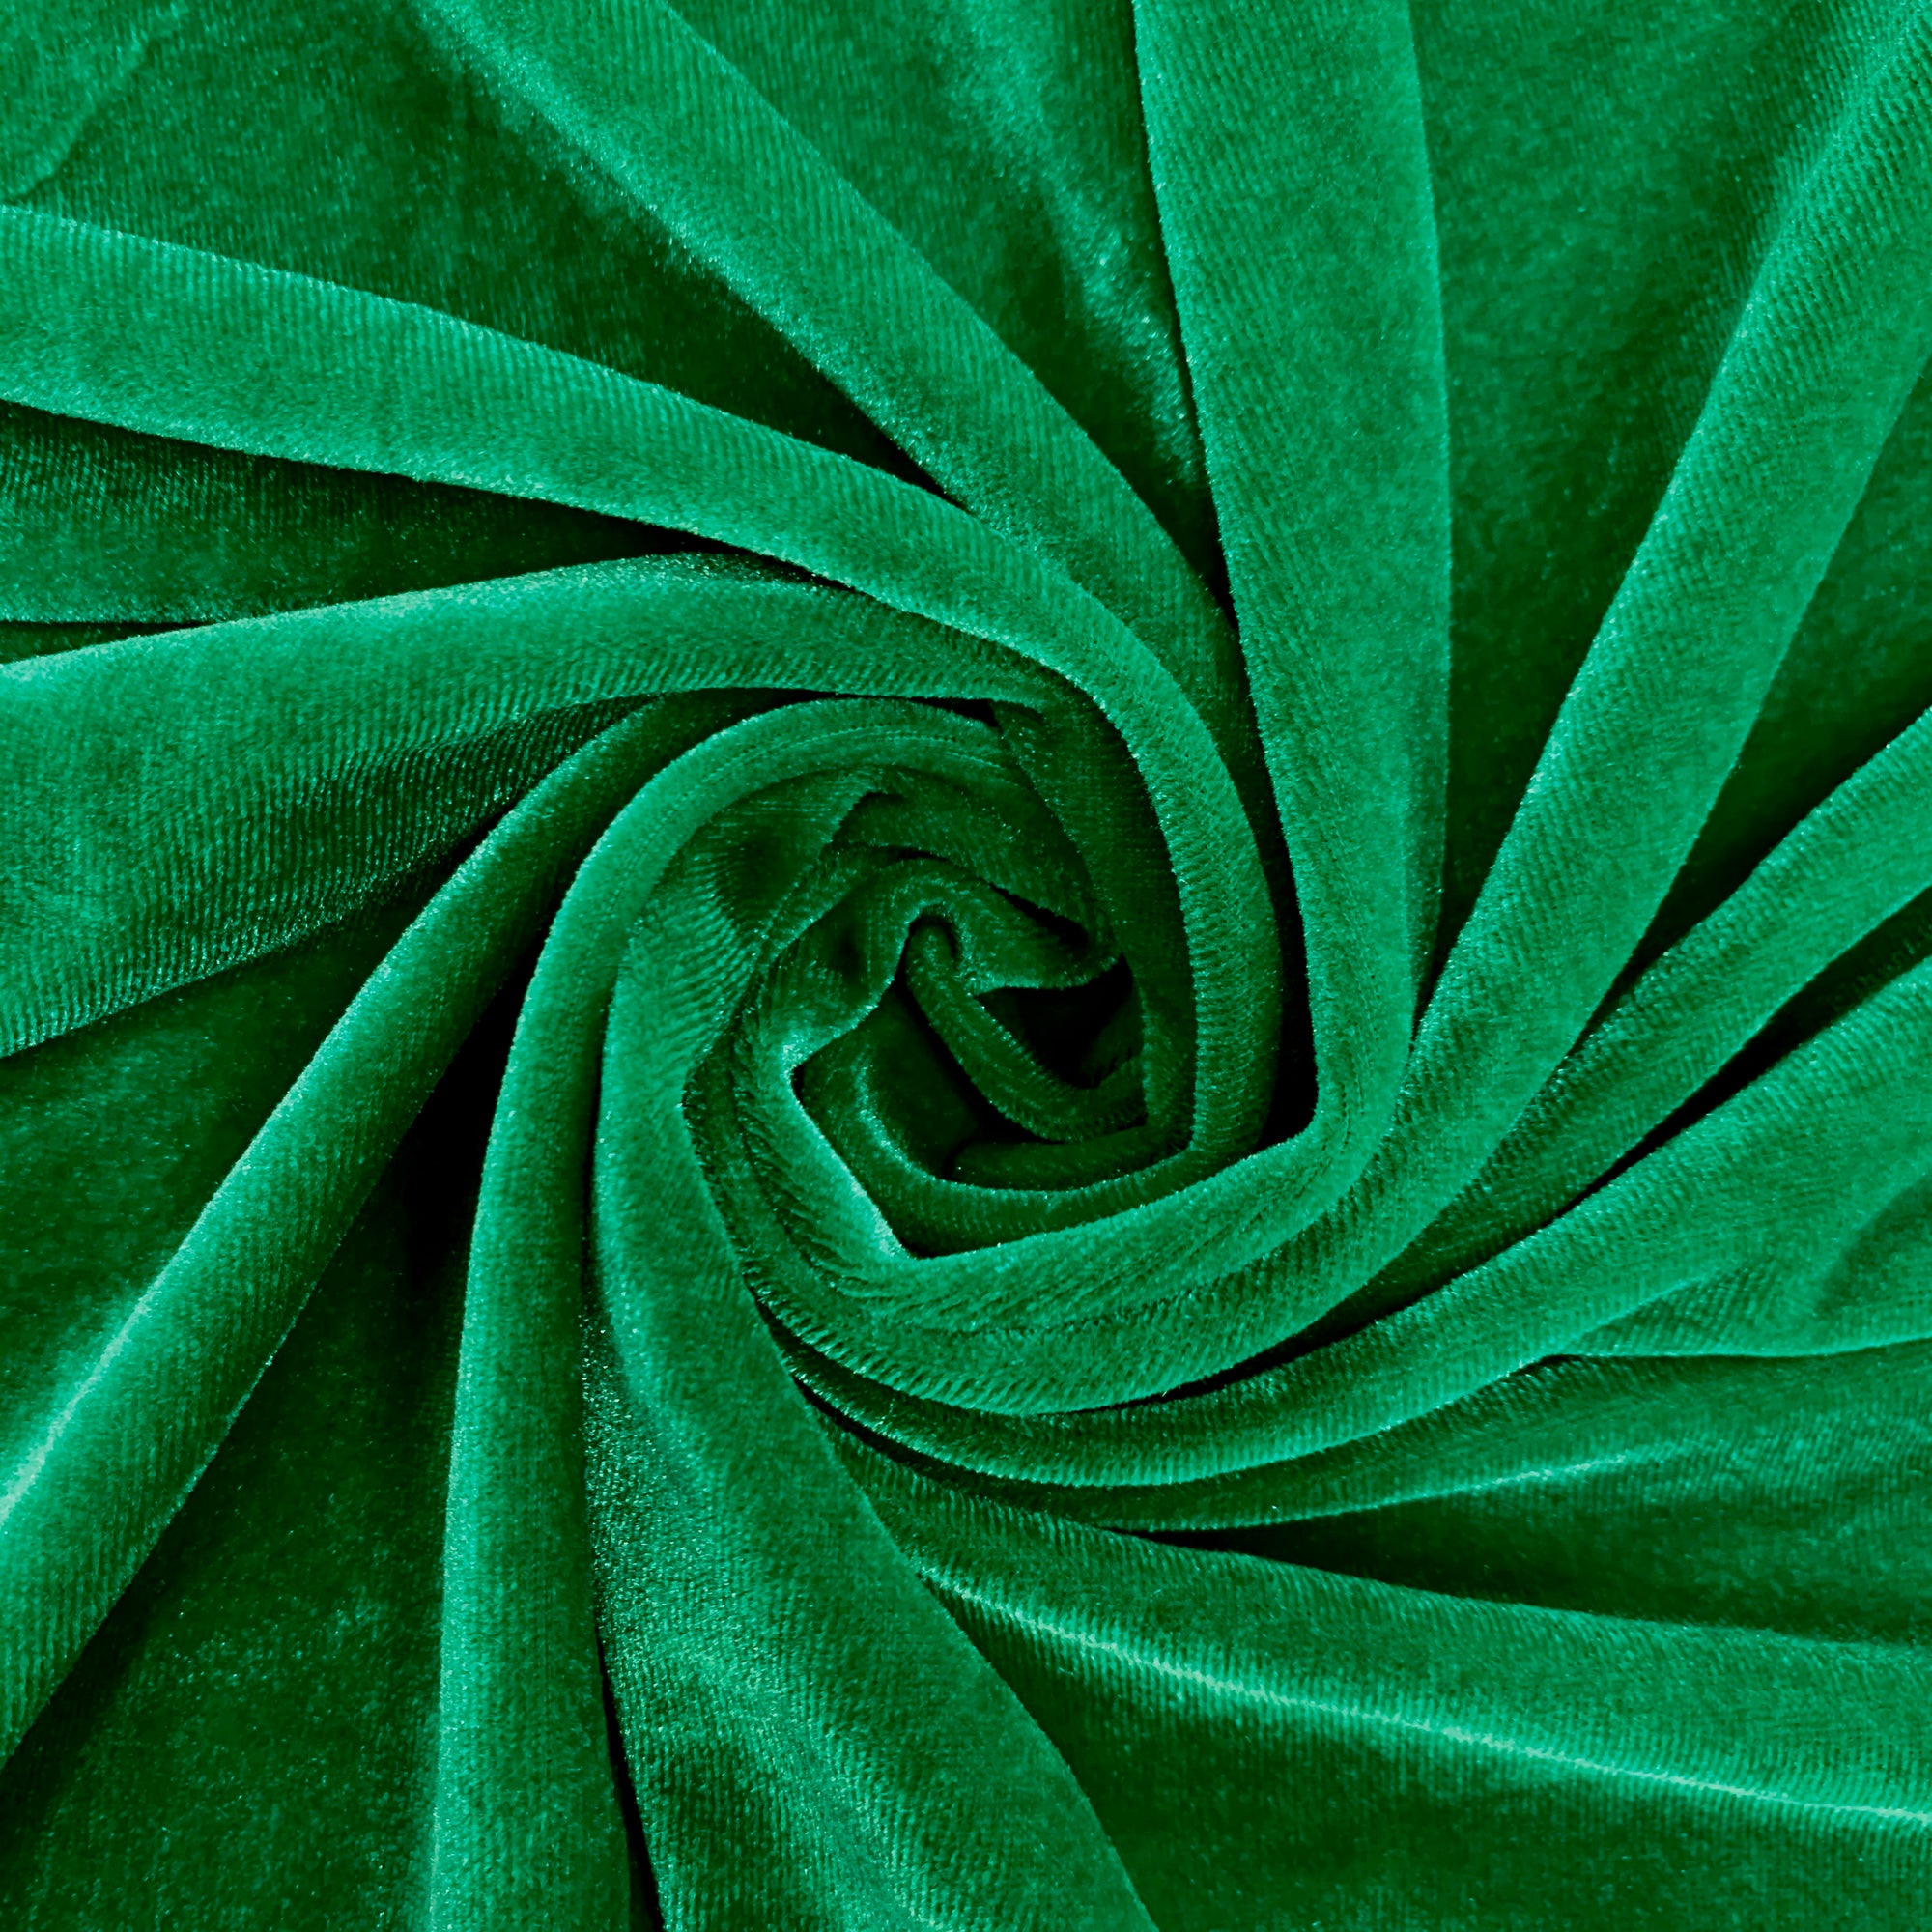 Princess GREEN Polyester Stretch Velvet Fabric for Bows, Top Knots, Head Wraps, Scrunchies, Clothes, Costumes, Crafts